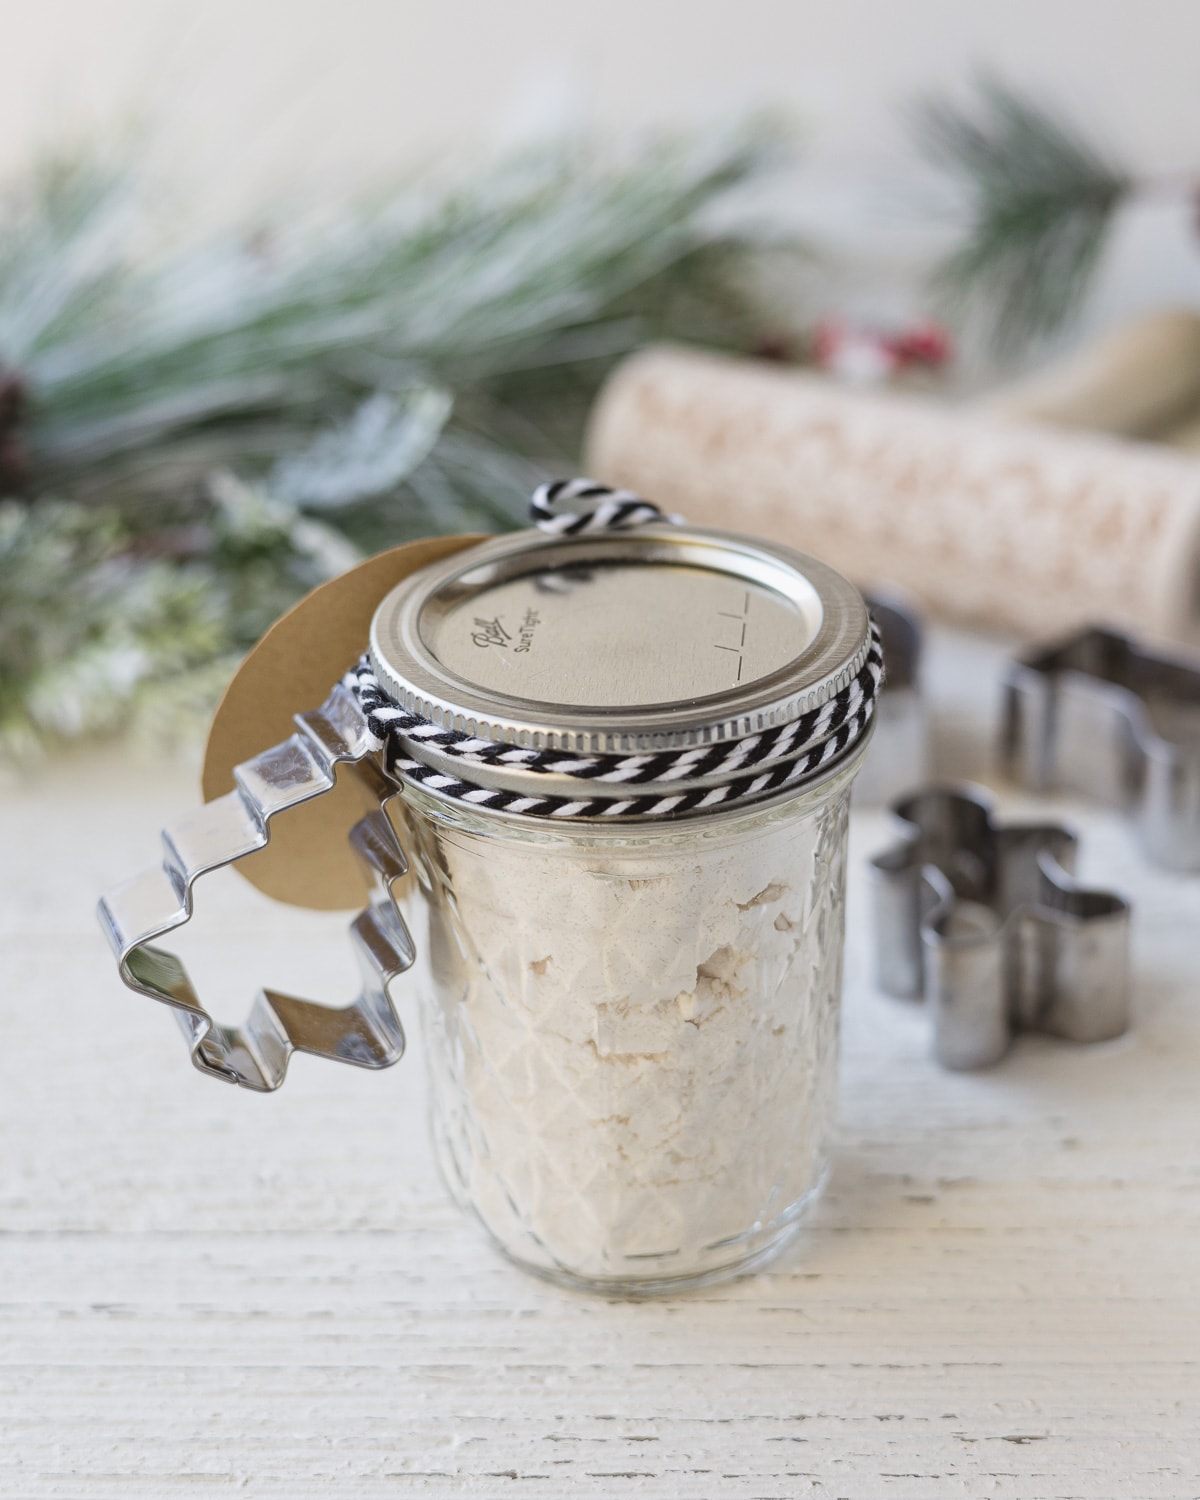 A jar of salt dough mix with a tag and cookie cutter.